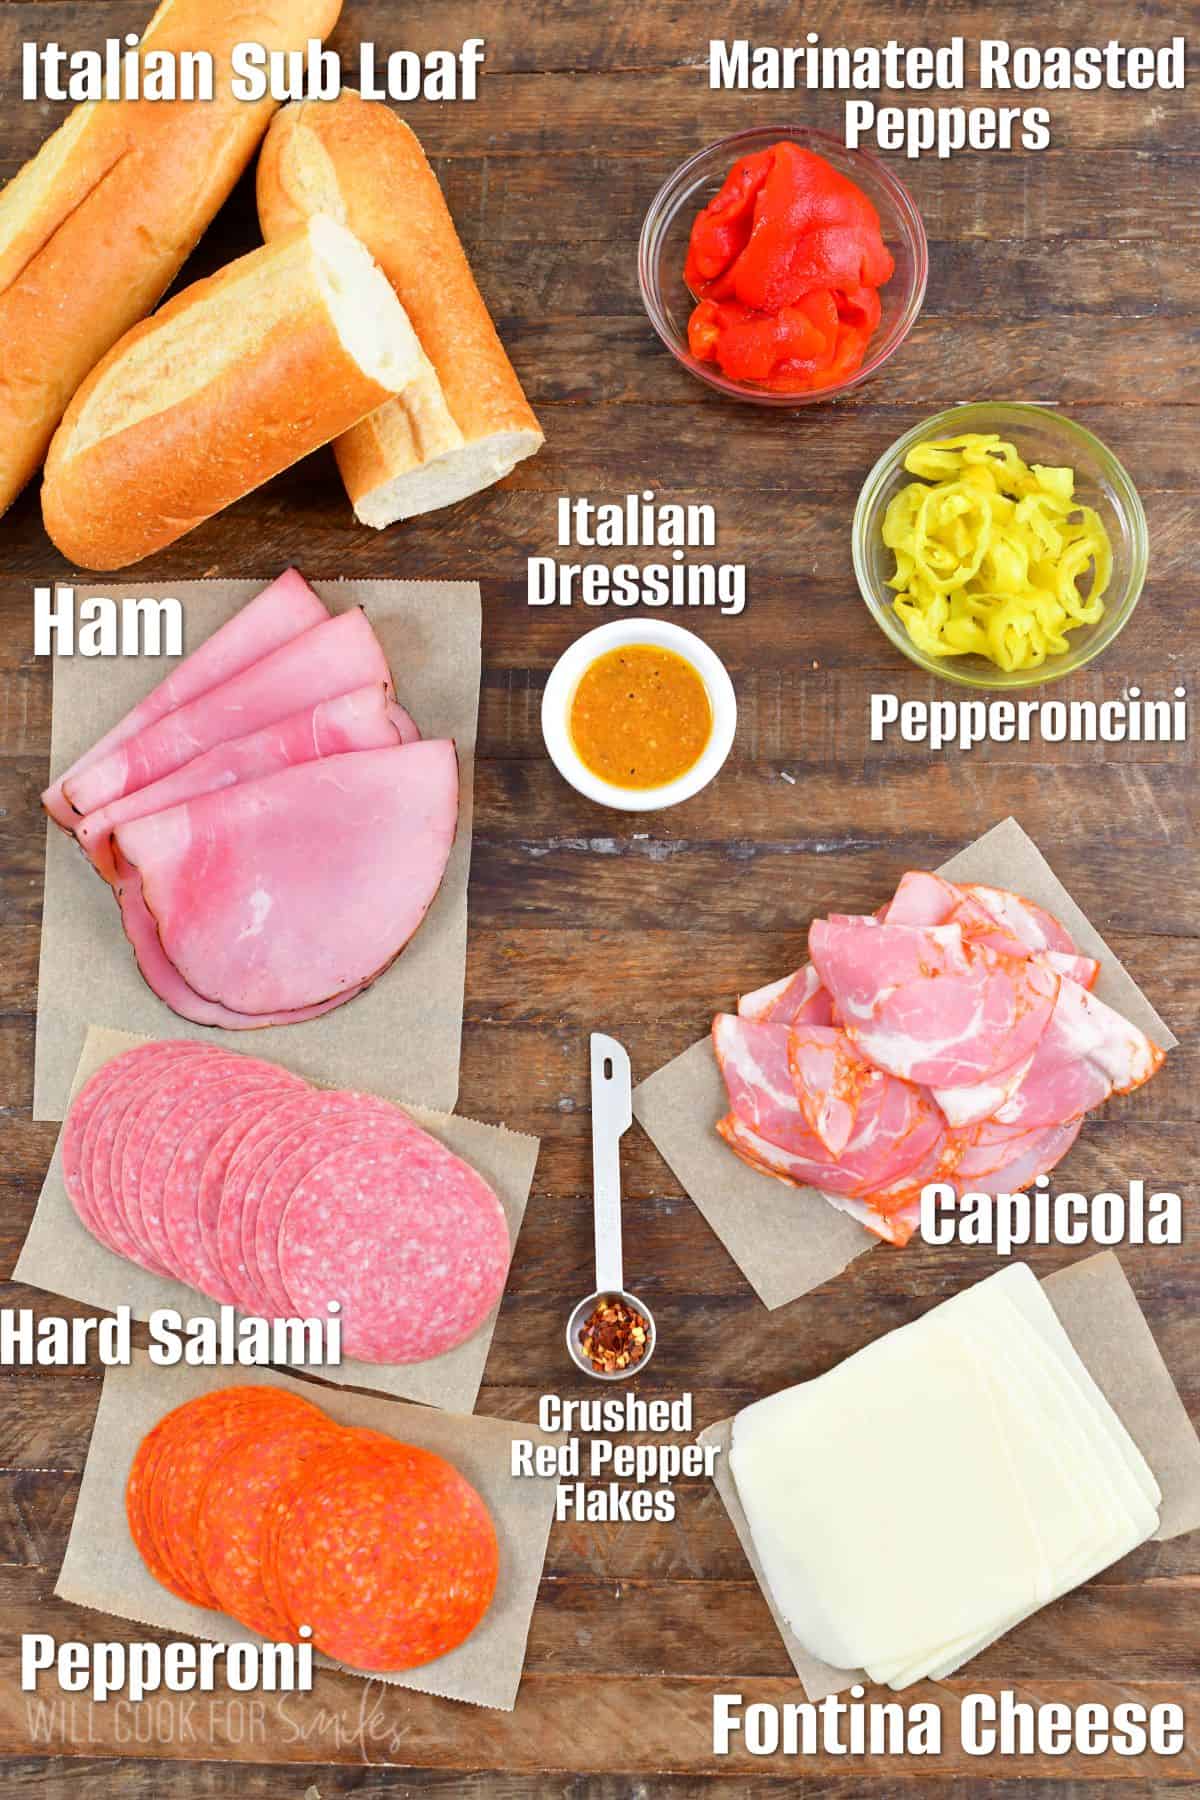 Labeled ingredients for Italian sub on a wood surface.